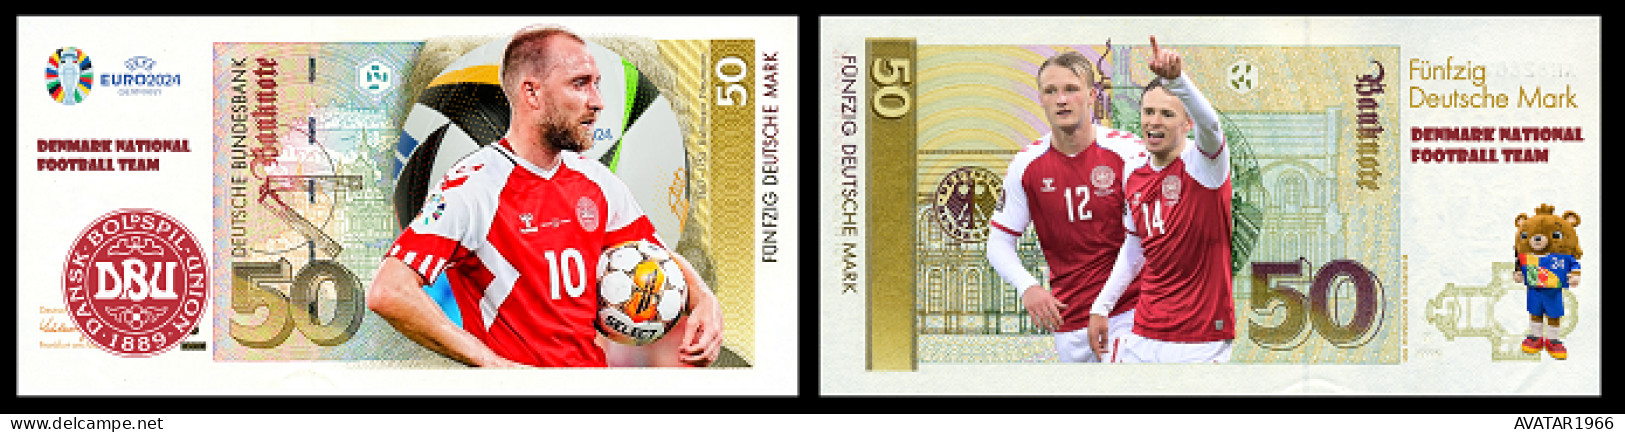 UEFA European Football Championship 2024 Qualified Country  Denmark 8 Pieces Germany Fantasy Paper Money - [15] Commemoratives & Special Issues